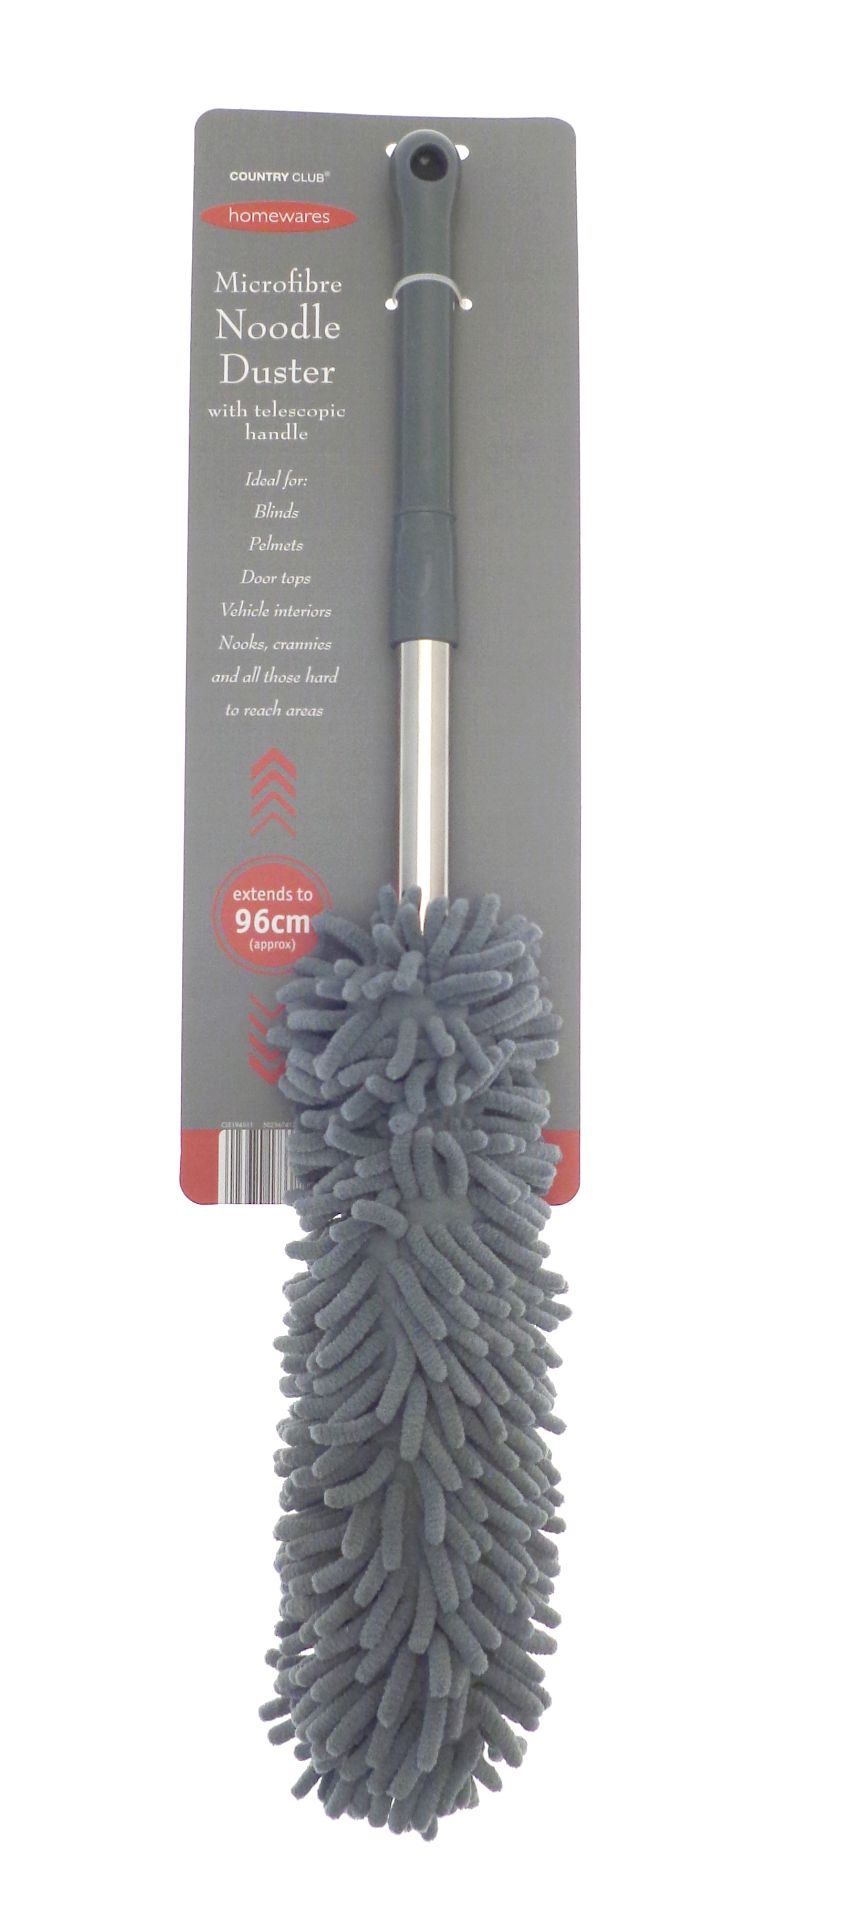 New Grey Microfibre Extending Noodle Duster Up to 96cm